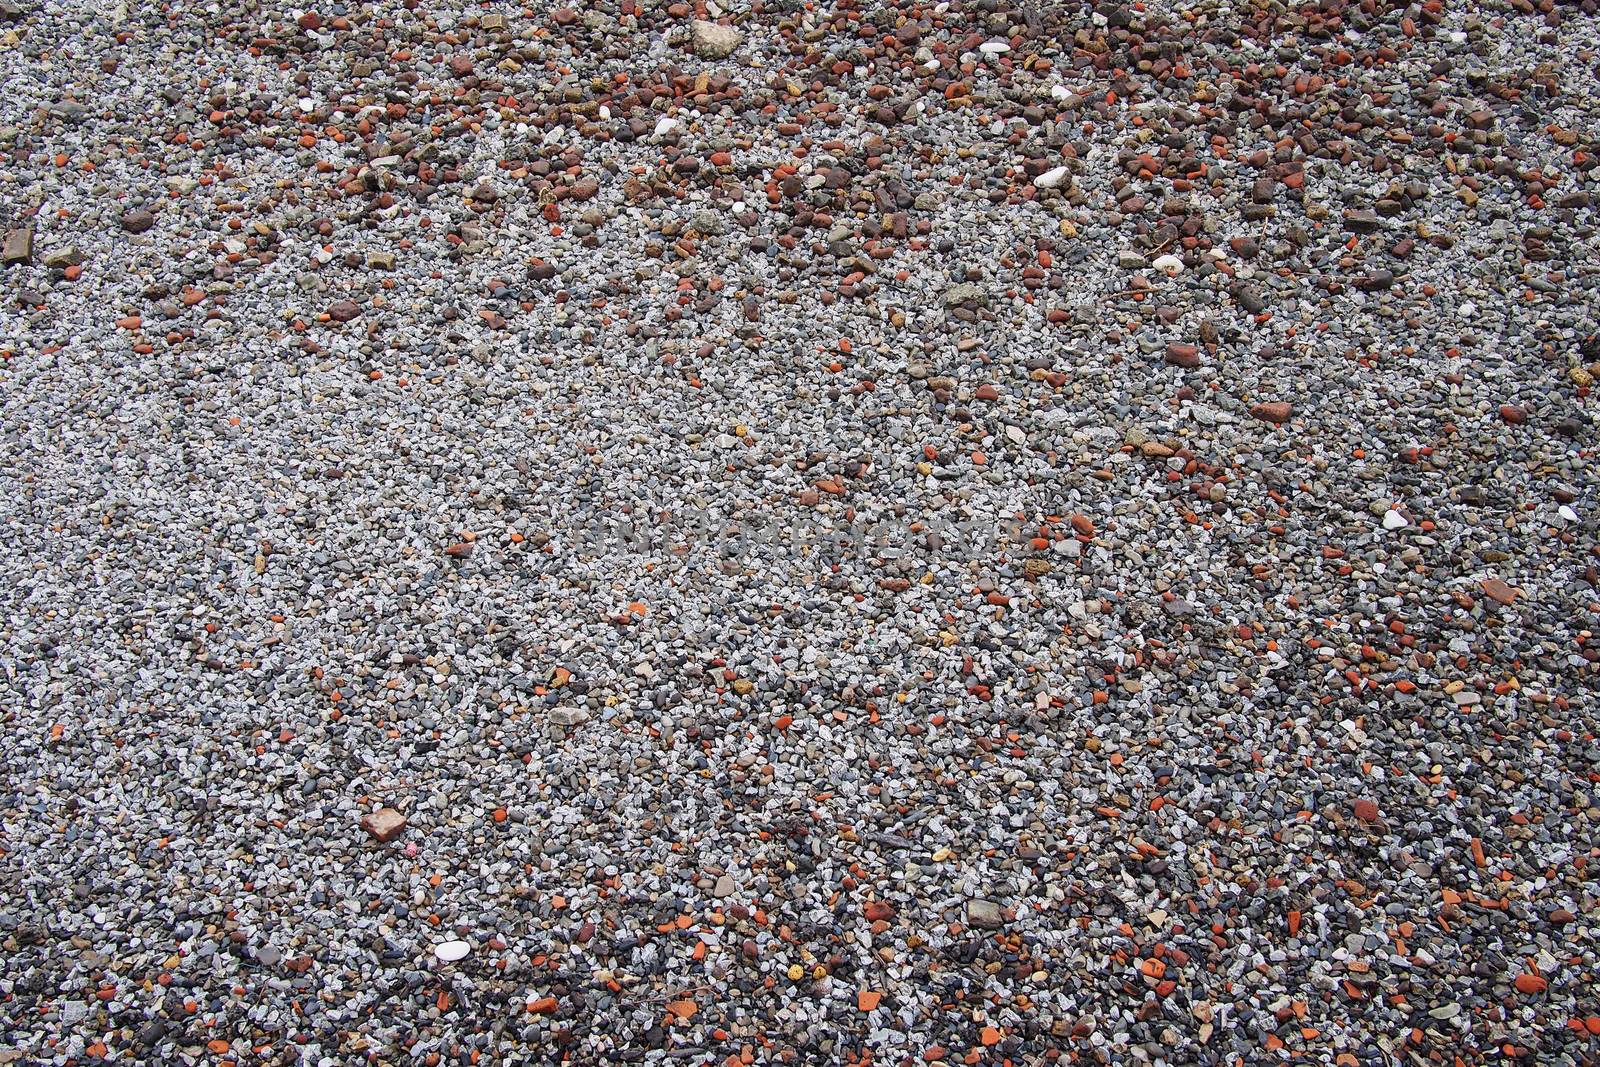 Abstract background of pebbles on the beach